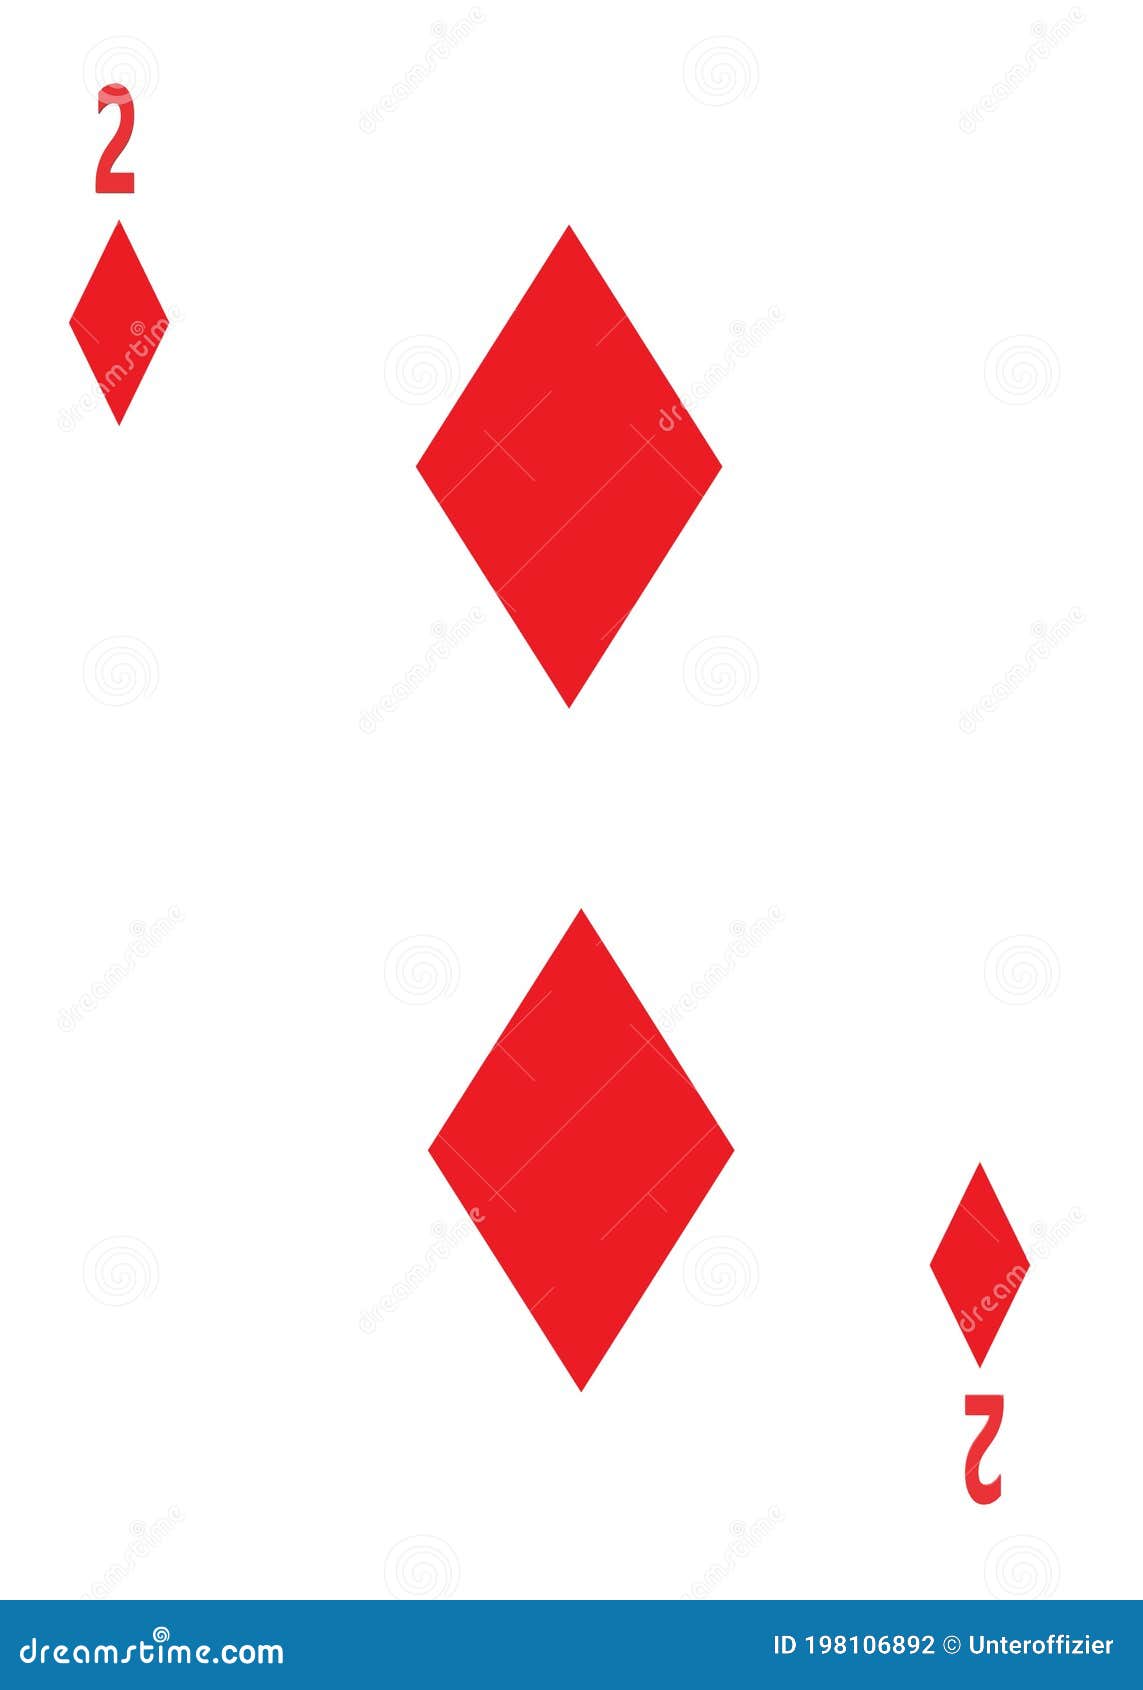 The Card Sharp with the Ace of Diamonds - Wikipedia